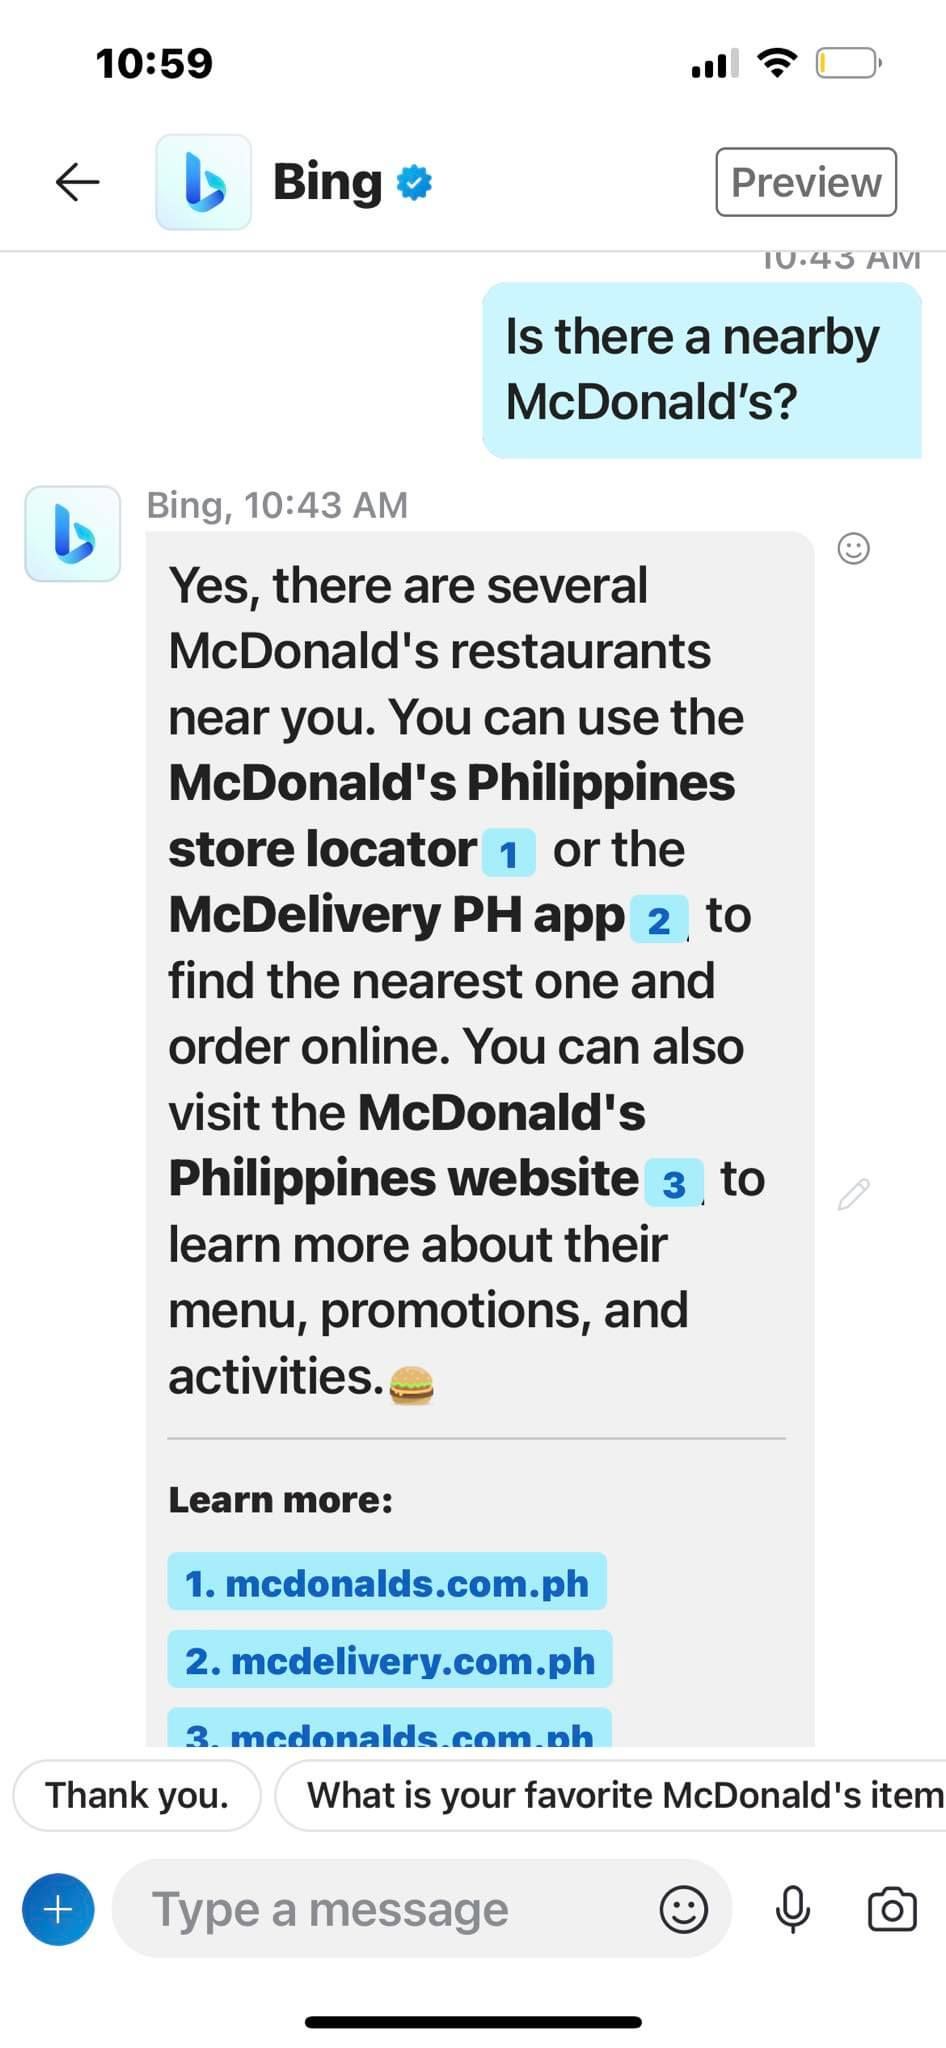 Bing AI Can't Recommend Nearby Mcdonald's Locations